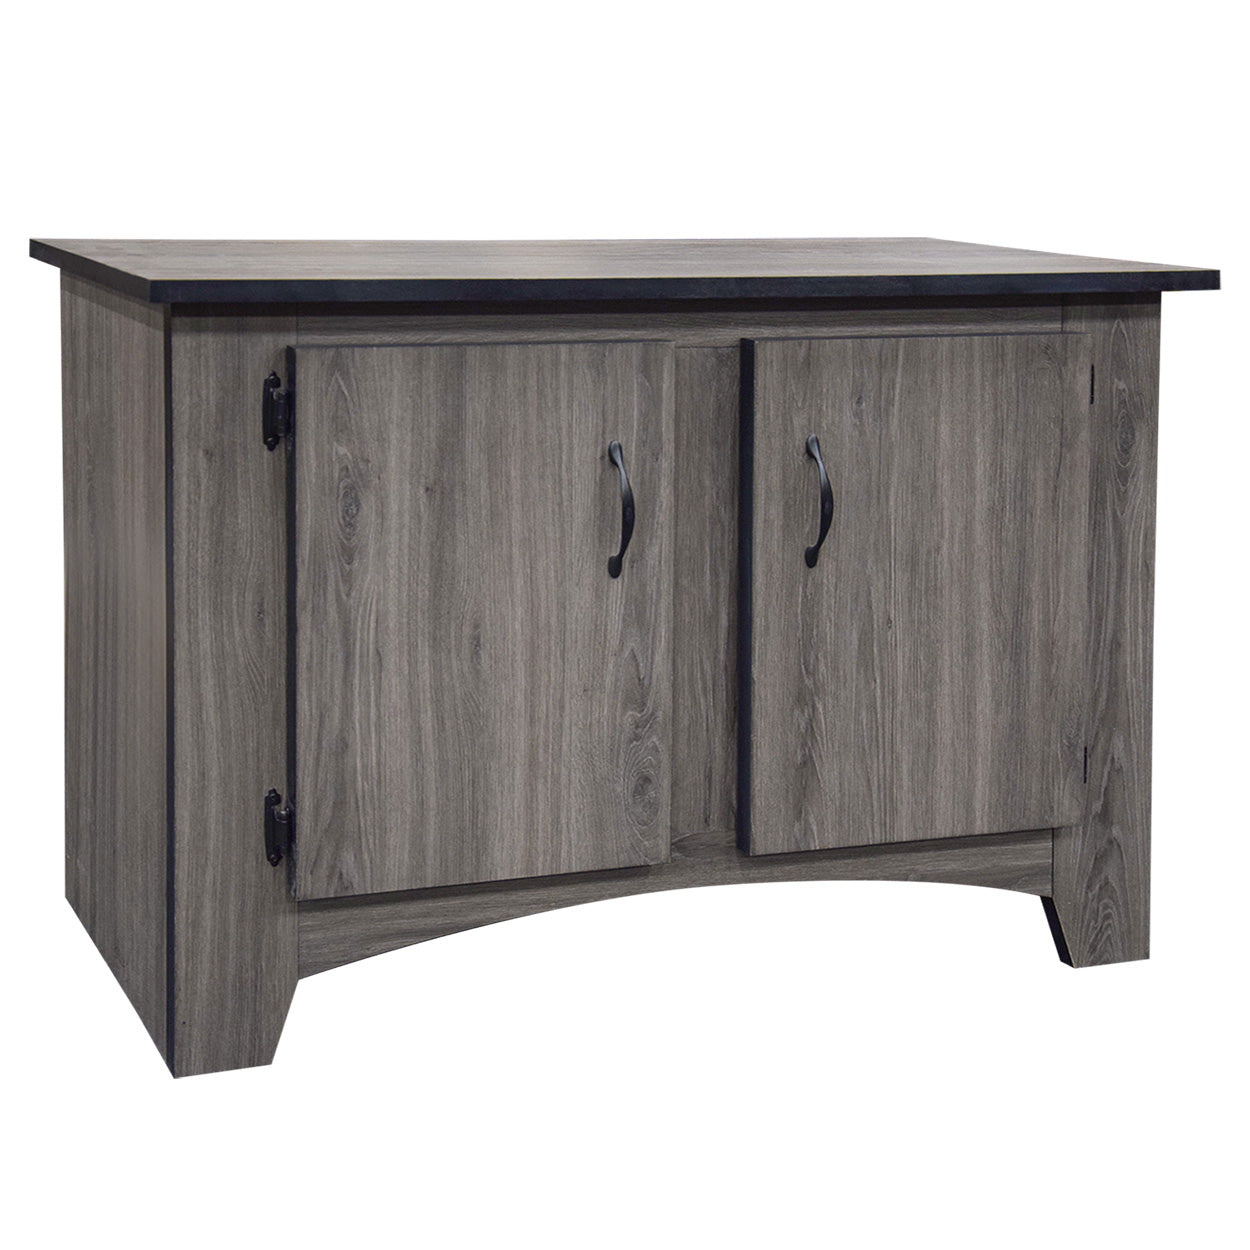 Seapora Rustic Grey Stand (Special Order Product)